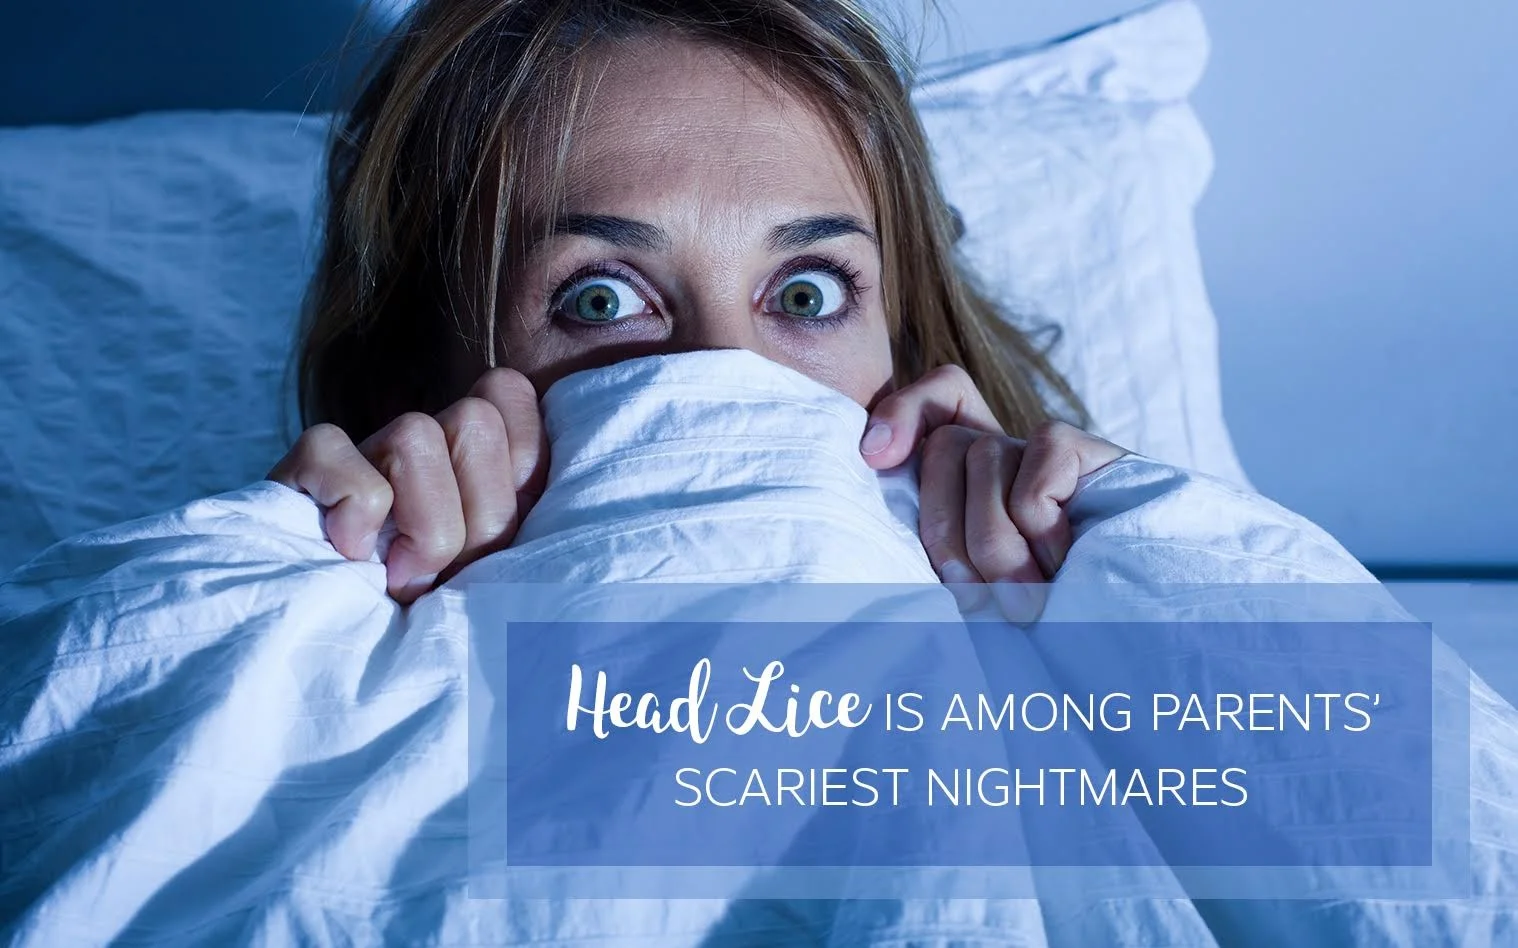 Head lice removal scares a mother hiding in bed because head lice is among parents’ scariest nightmares visit Lice Clinics of America - Mid South for more information